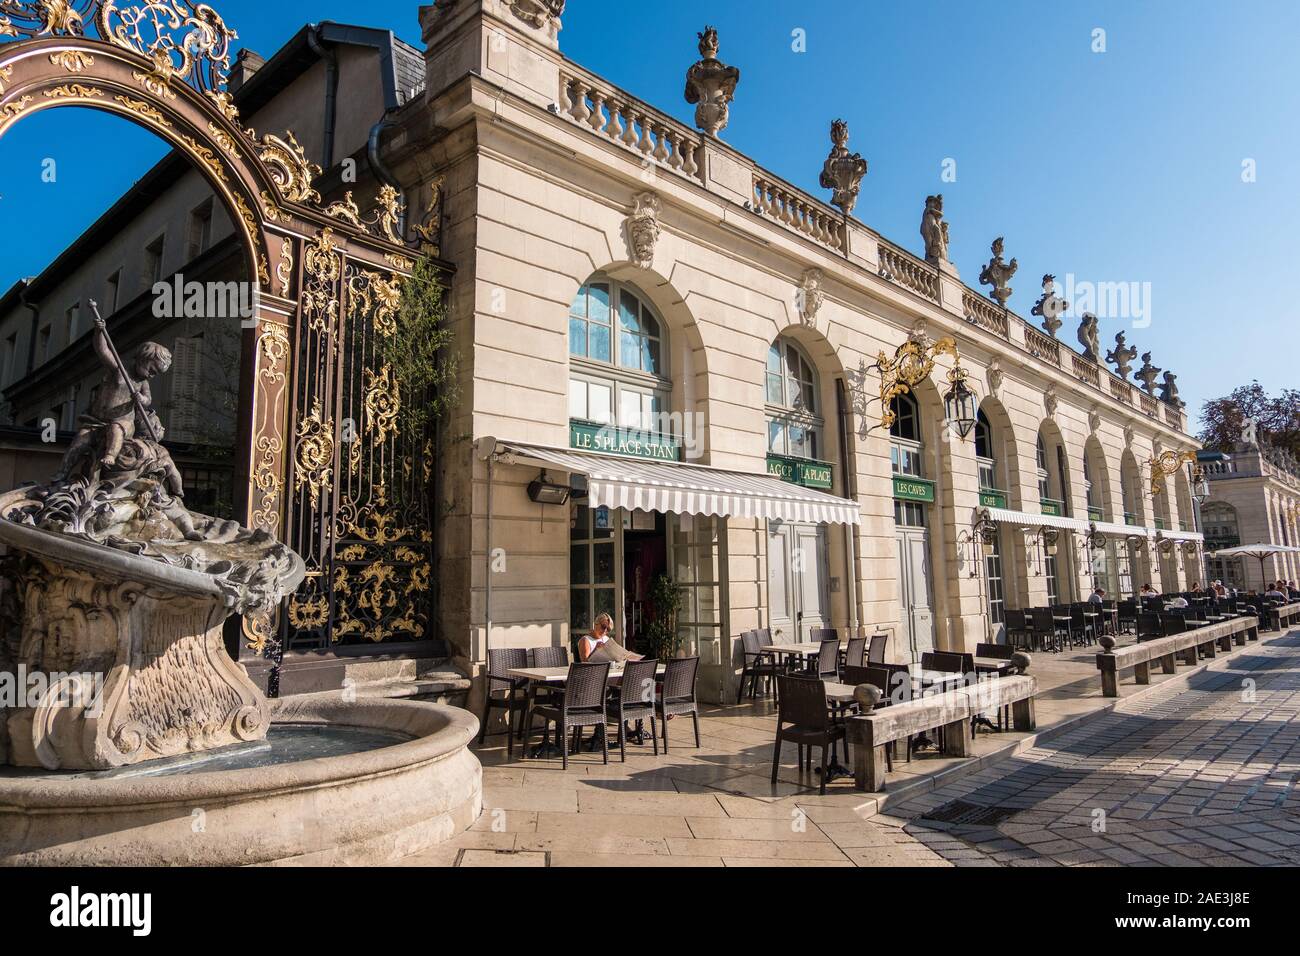 Nancy, France - August 31, 2019: Place de Alliance and Fountain in Nancy, Lorraine France Stock Photo